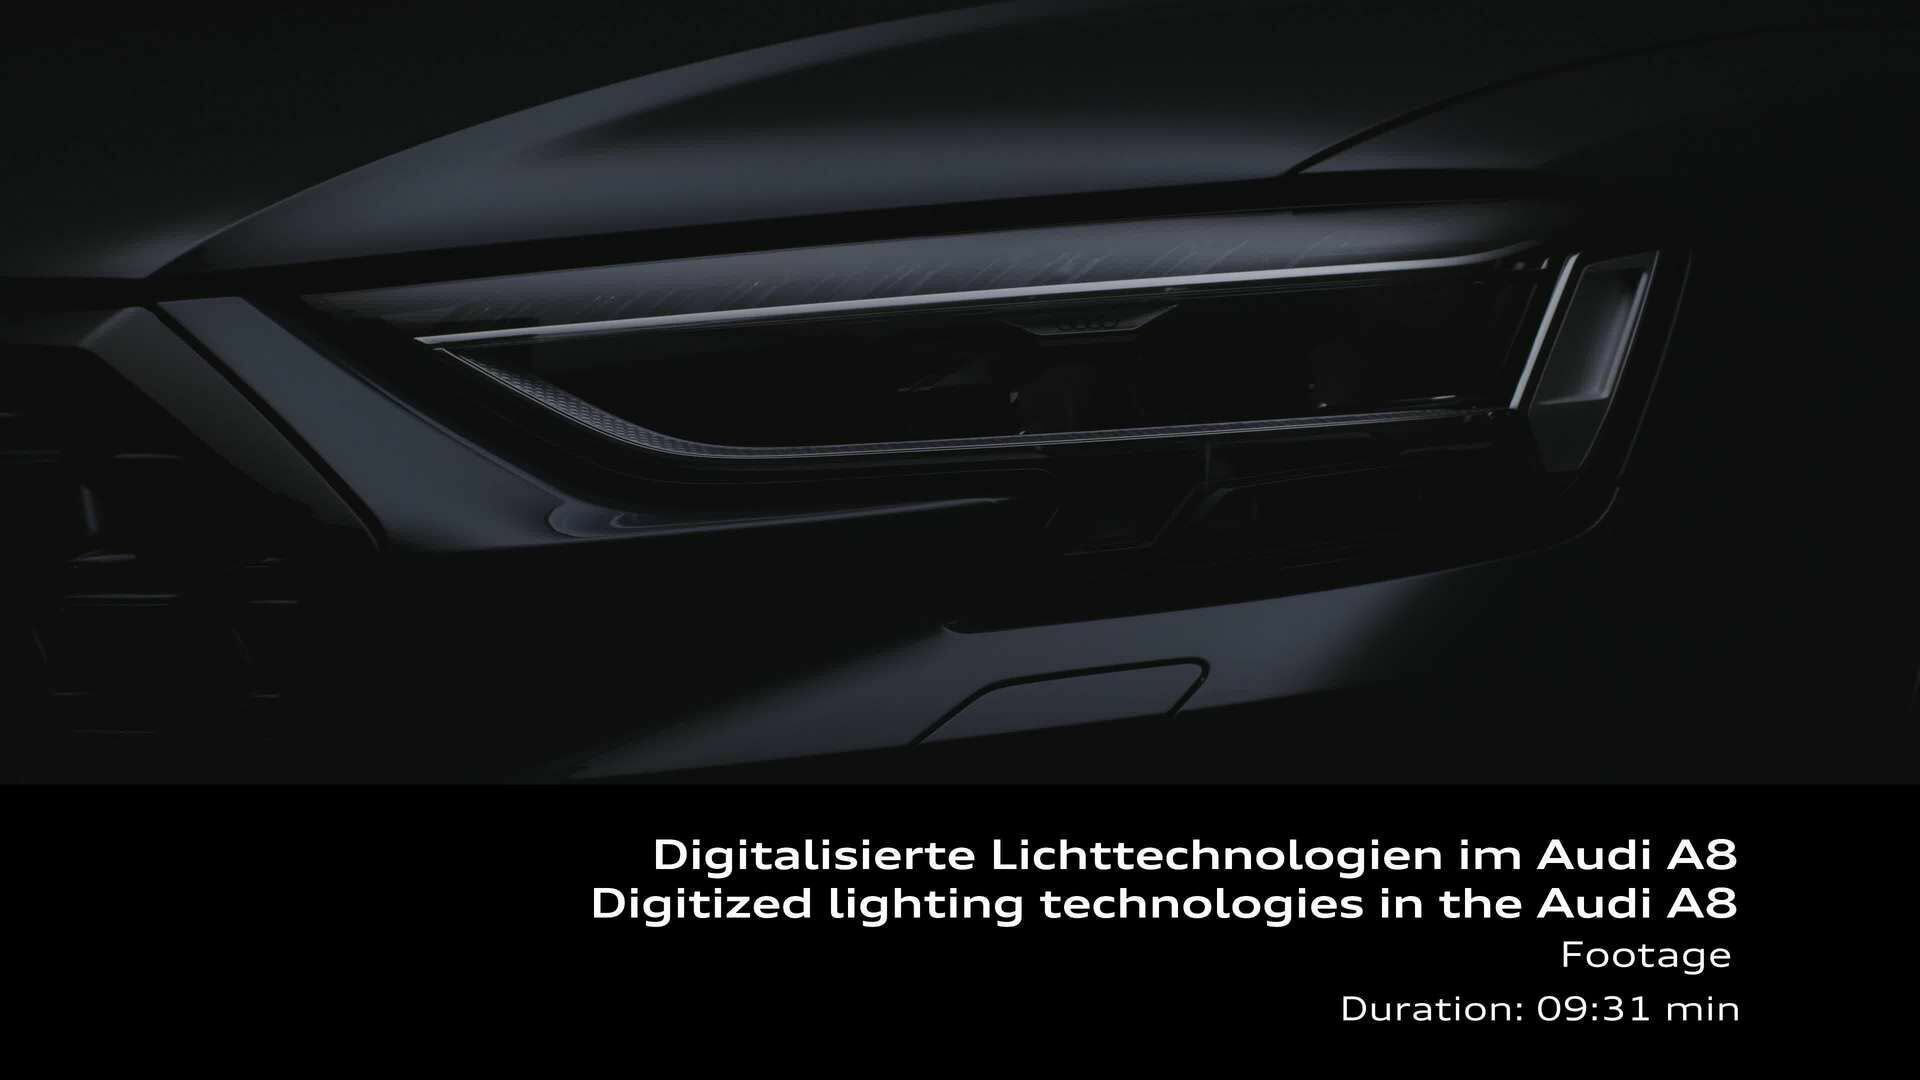 Footage: Digitalized lighting technologies in the Audi A8